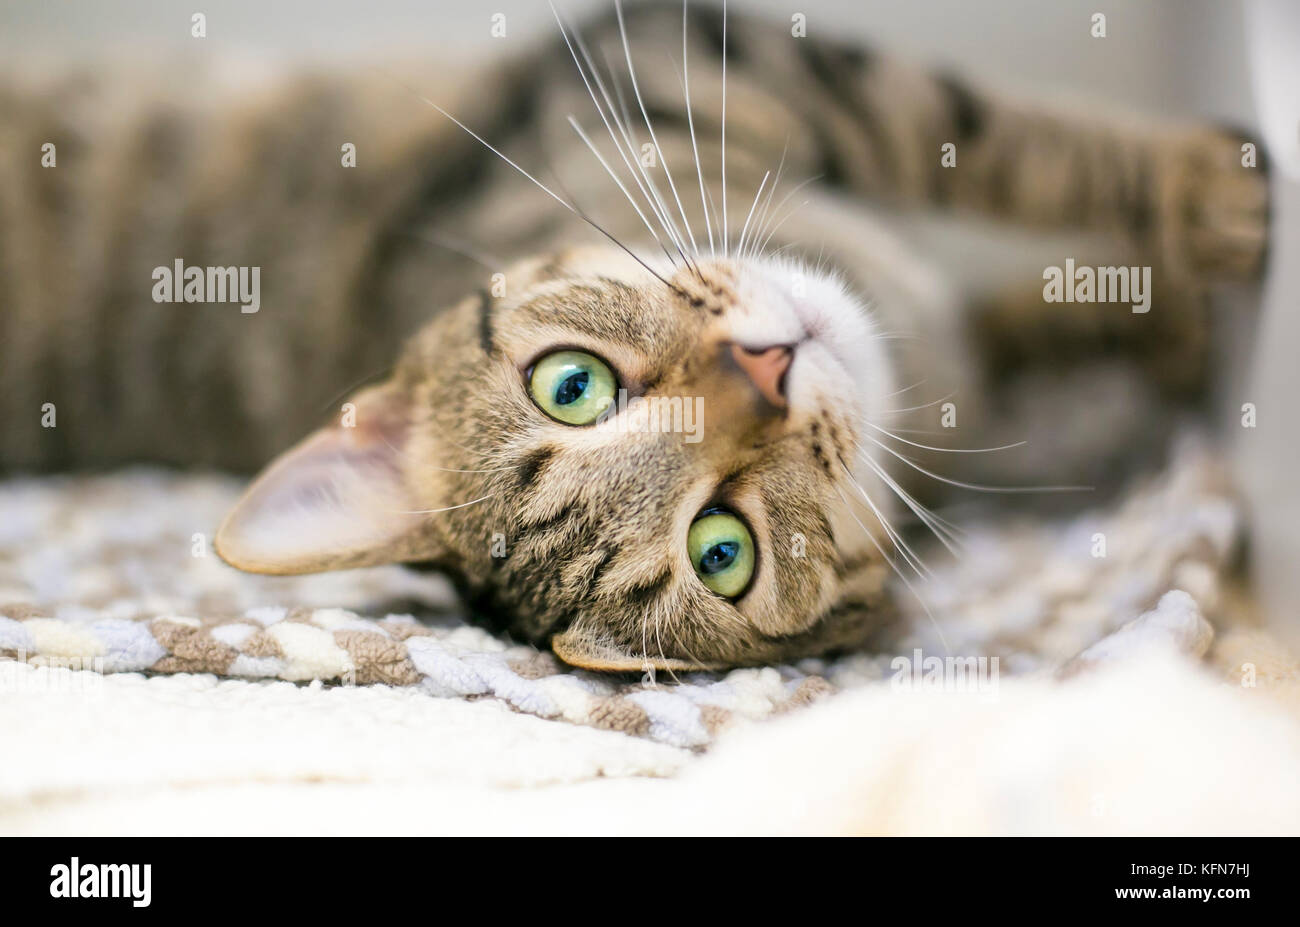 A domestic shorthair tabby cat lying upside down on a blanket Stock Photo